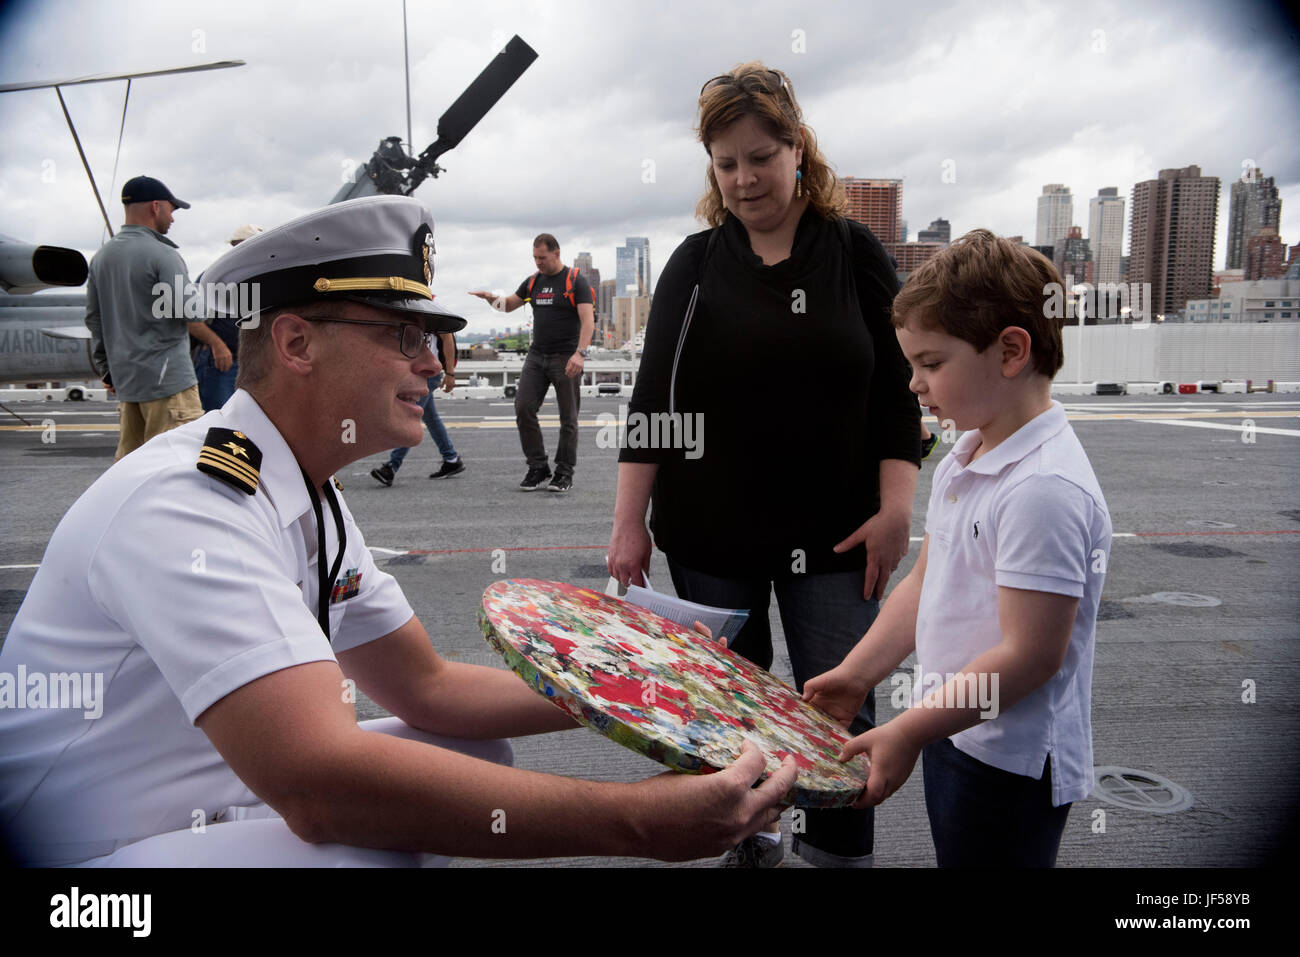 170526-N-MS174-002 NEW YORK (May 26, 2017) Lt. Cmdr. James McLeod, a public affairs officer assigned to U.S. Fleet Forces Command, shows a shipboard-generated compressed plastic disk to a child at the U.S. Navy’s “Stewards of the Sea: Defending Freedom, Protecting the Environment” exhibit aboard the amphibious assault ship USS Kearsarge (LHD 3) during Fleet Week New York. The Navy employs every means available to mitigate the potential environmental effects of our activities without jeopardizing the safety of our Sailors or impacting our Navy readiness mission. (U.S. Navy photo by Bobbie A. Ca Stock Photo